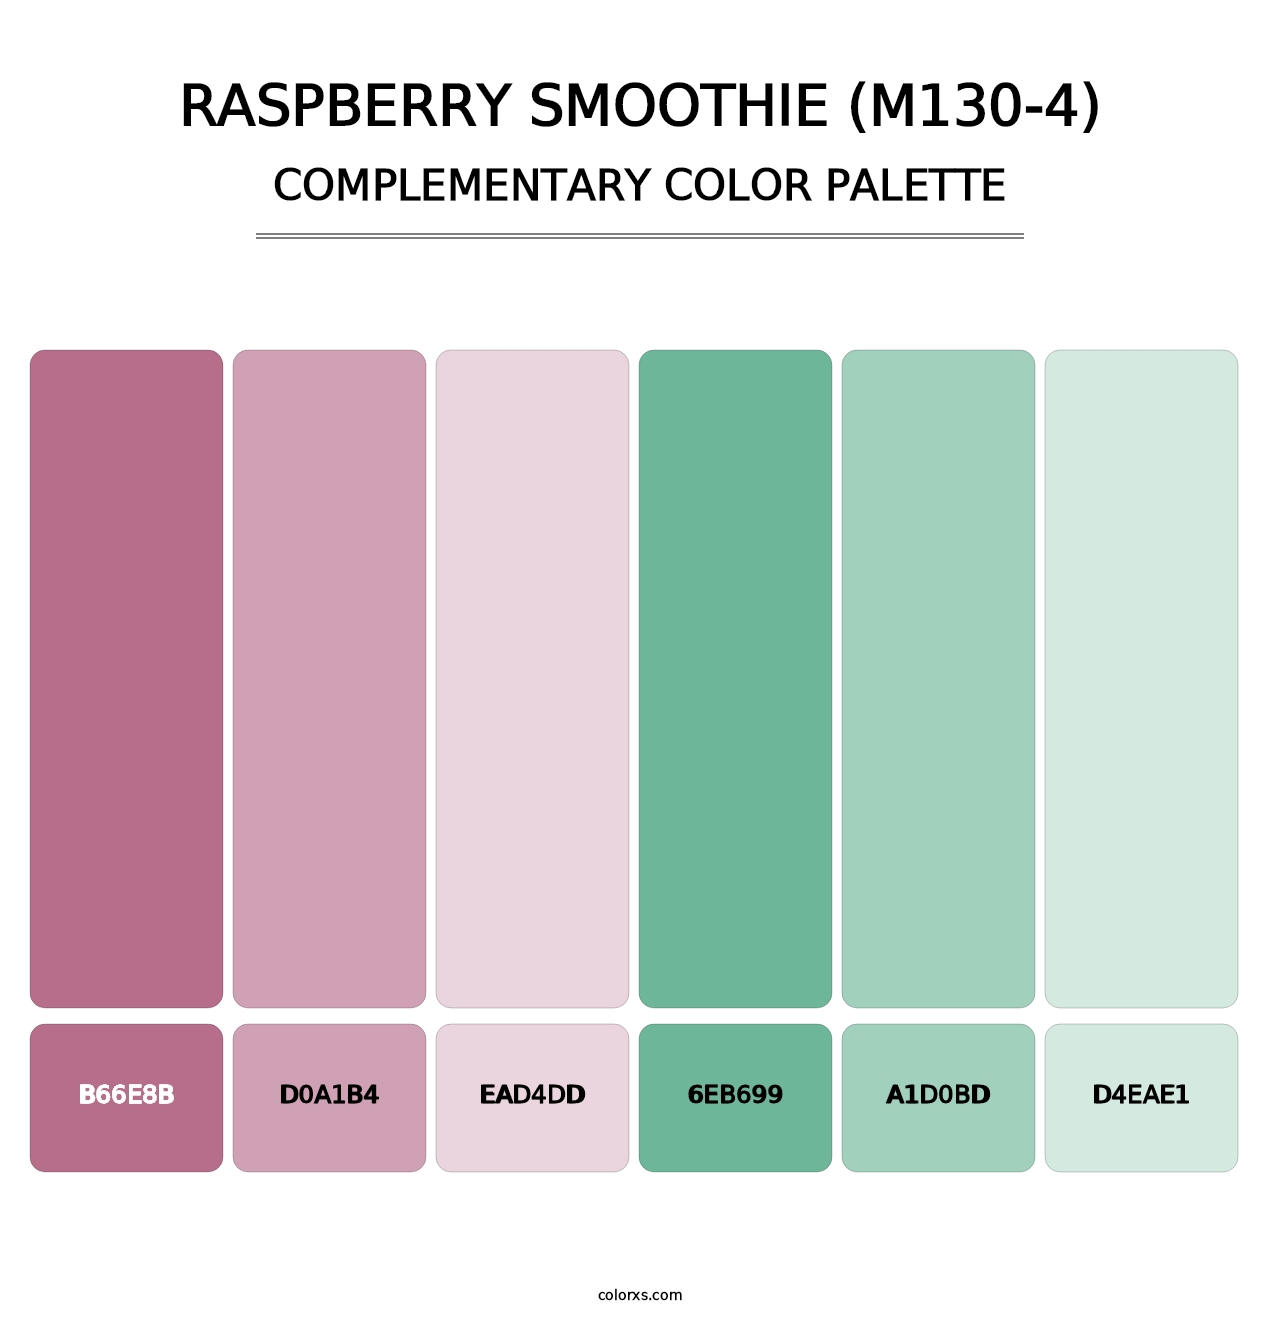 Raspberry Smoothie (M130-4) - Complementary Color Palette